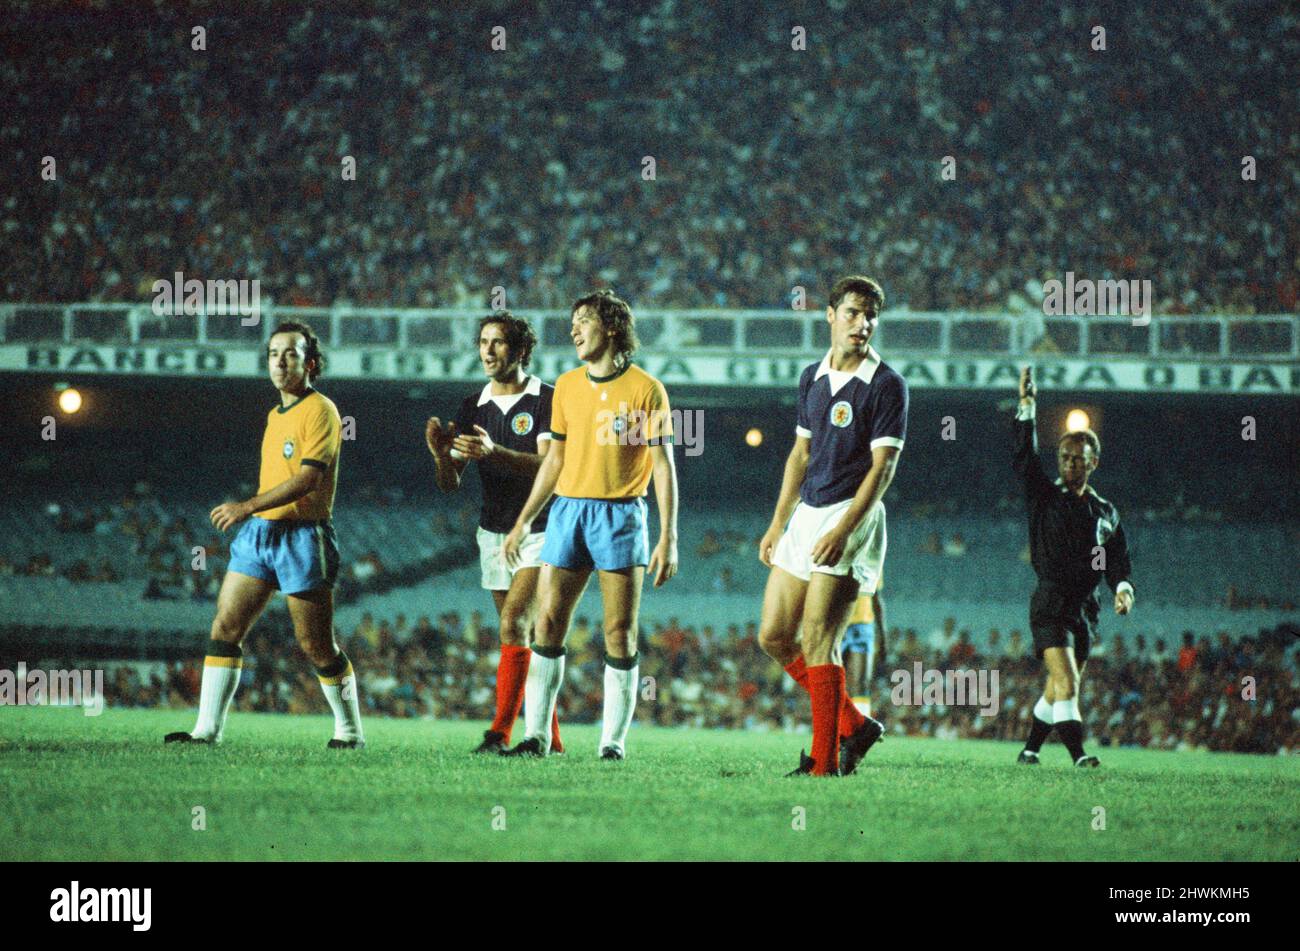 Brazil 1-0 Scotland, 1972 Brazil Independence Cup, final stage, Group A match at the Estadio do Maracana, Rio de Janeiro, Brazil, Wednesday 5th July 1972. Pictured, Tostao and Leivinha of Brazil with George Graham and Martin Buchan. Stock Photo